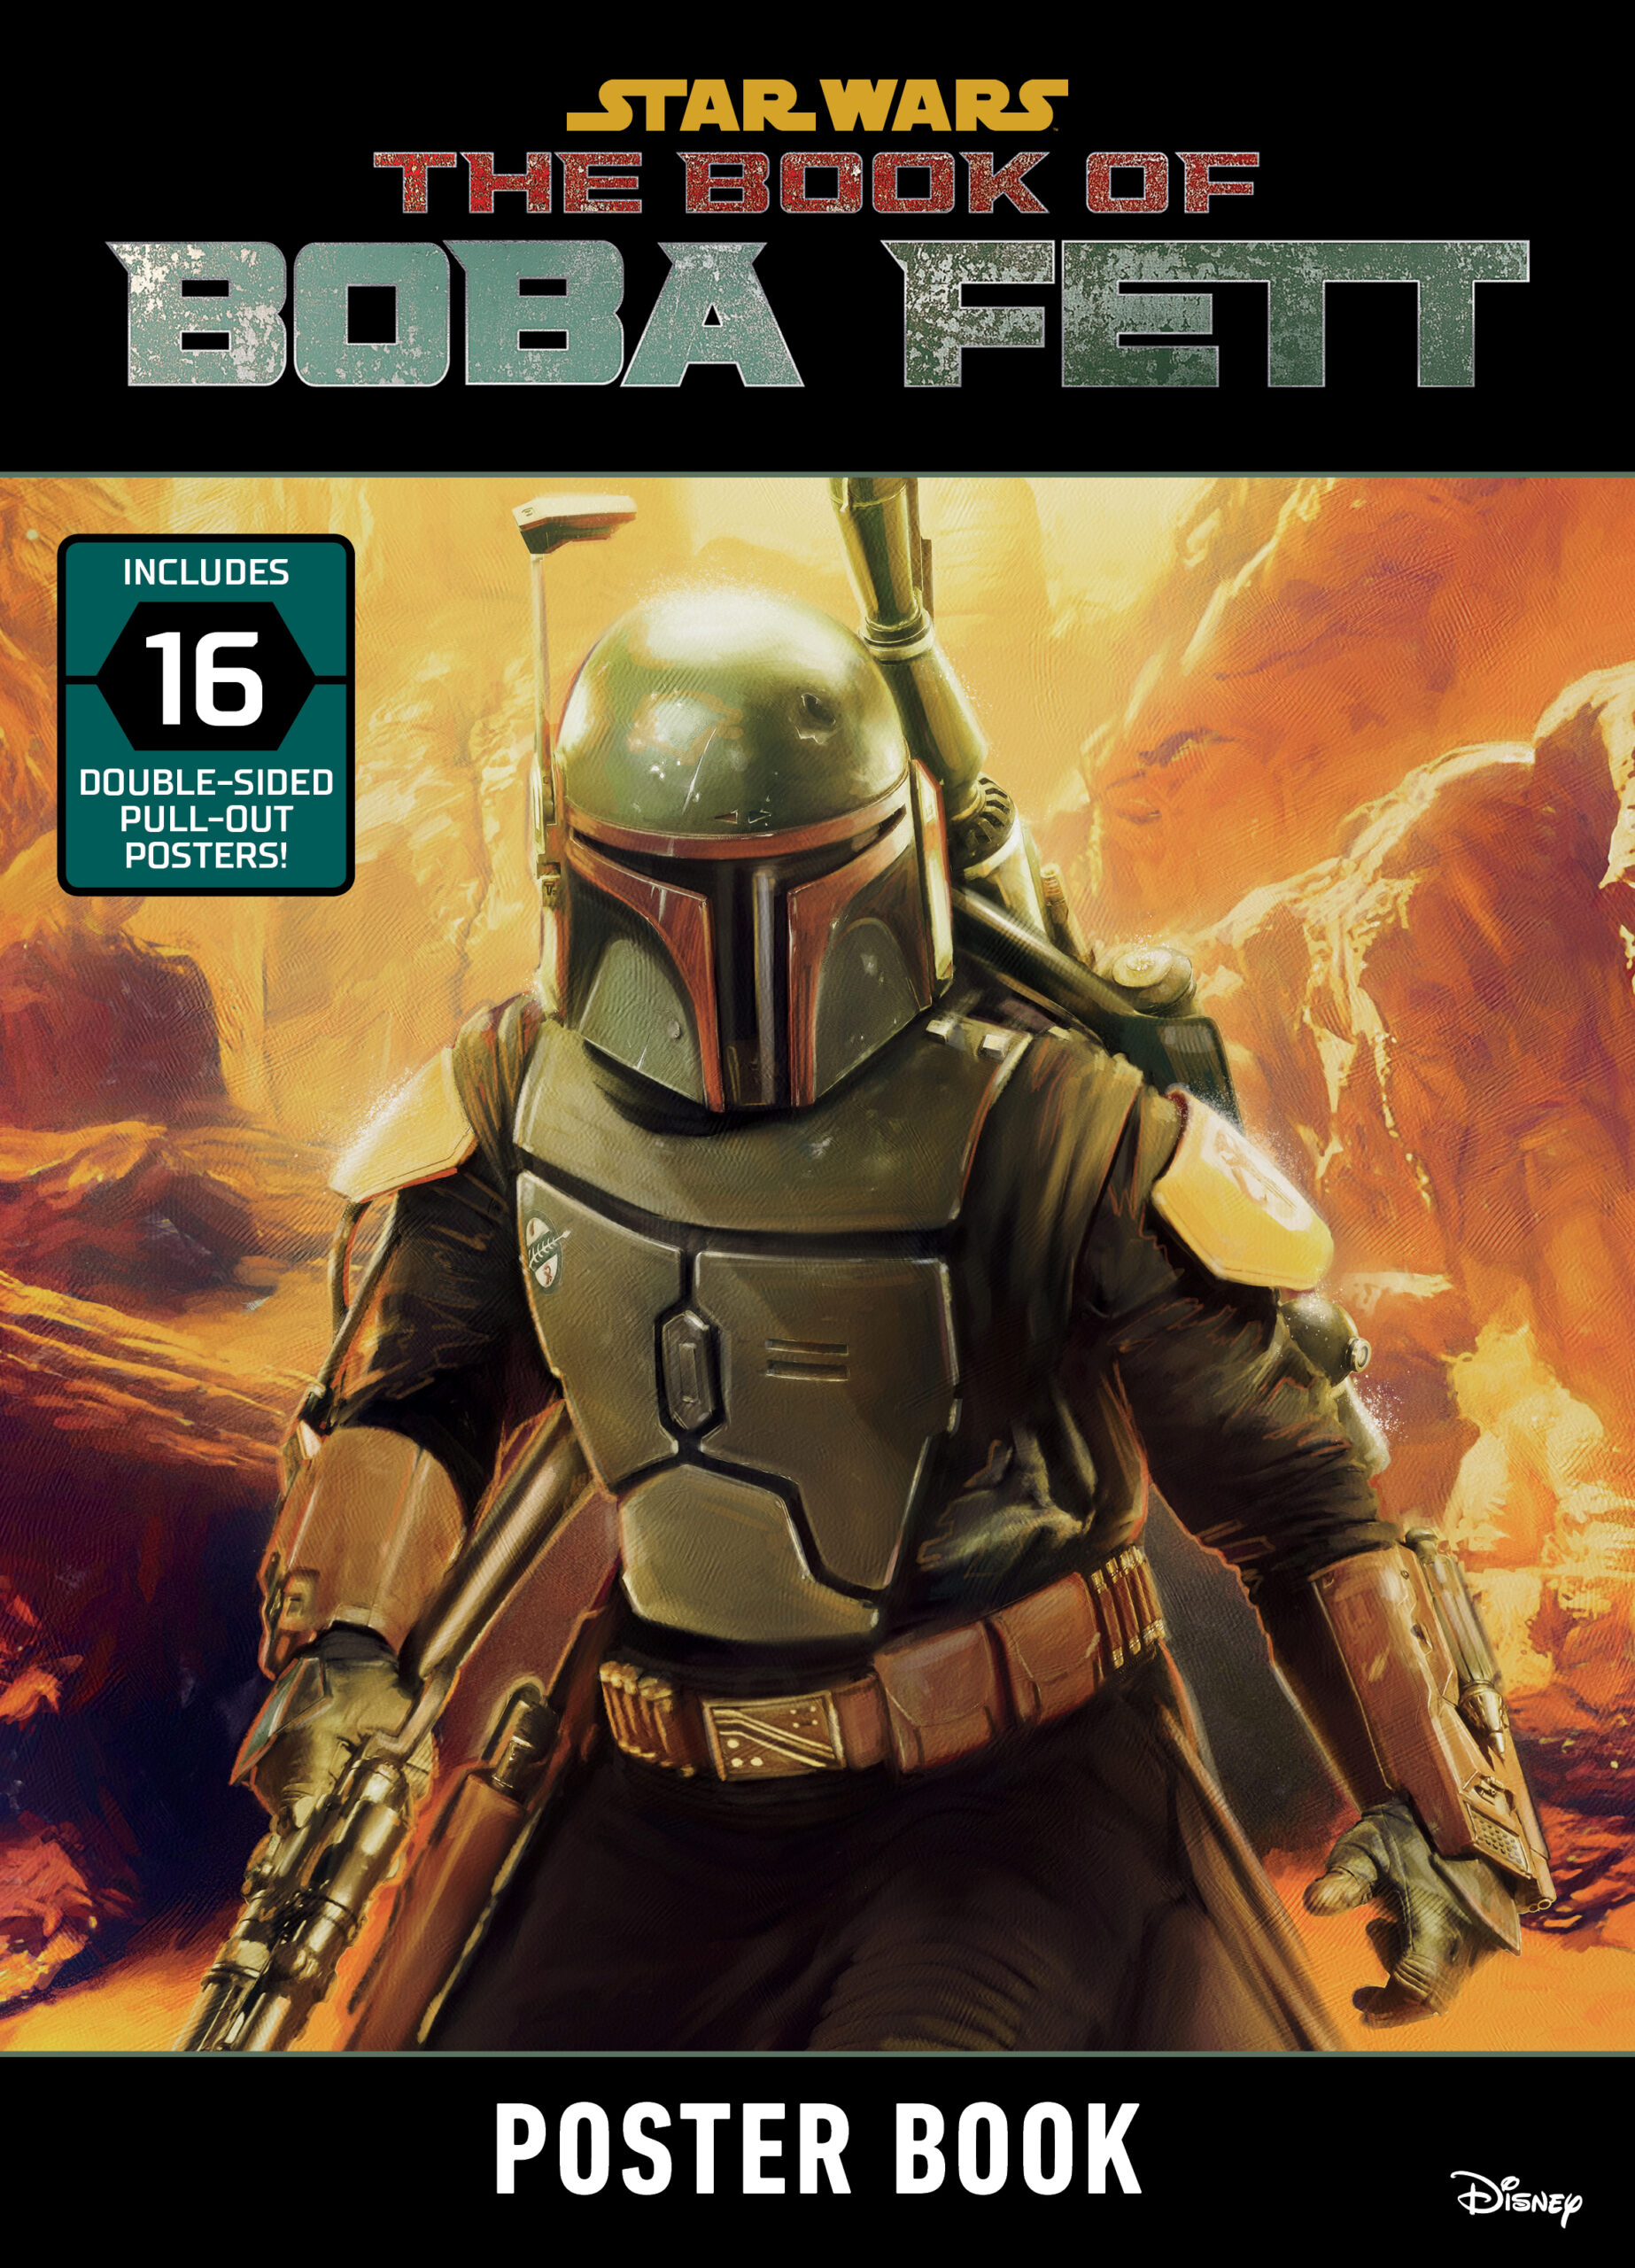 The Book of Boba Fett Poster Book by Lucasfilm Press - Star Wars Books